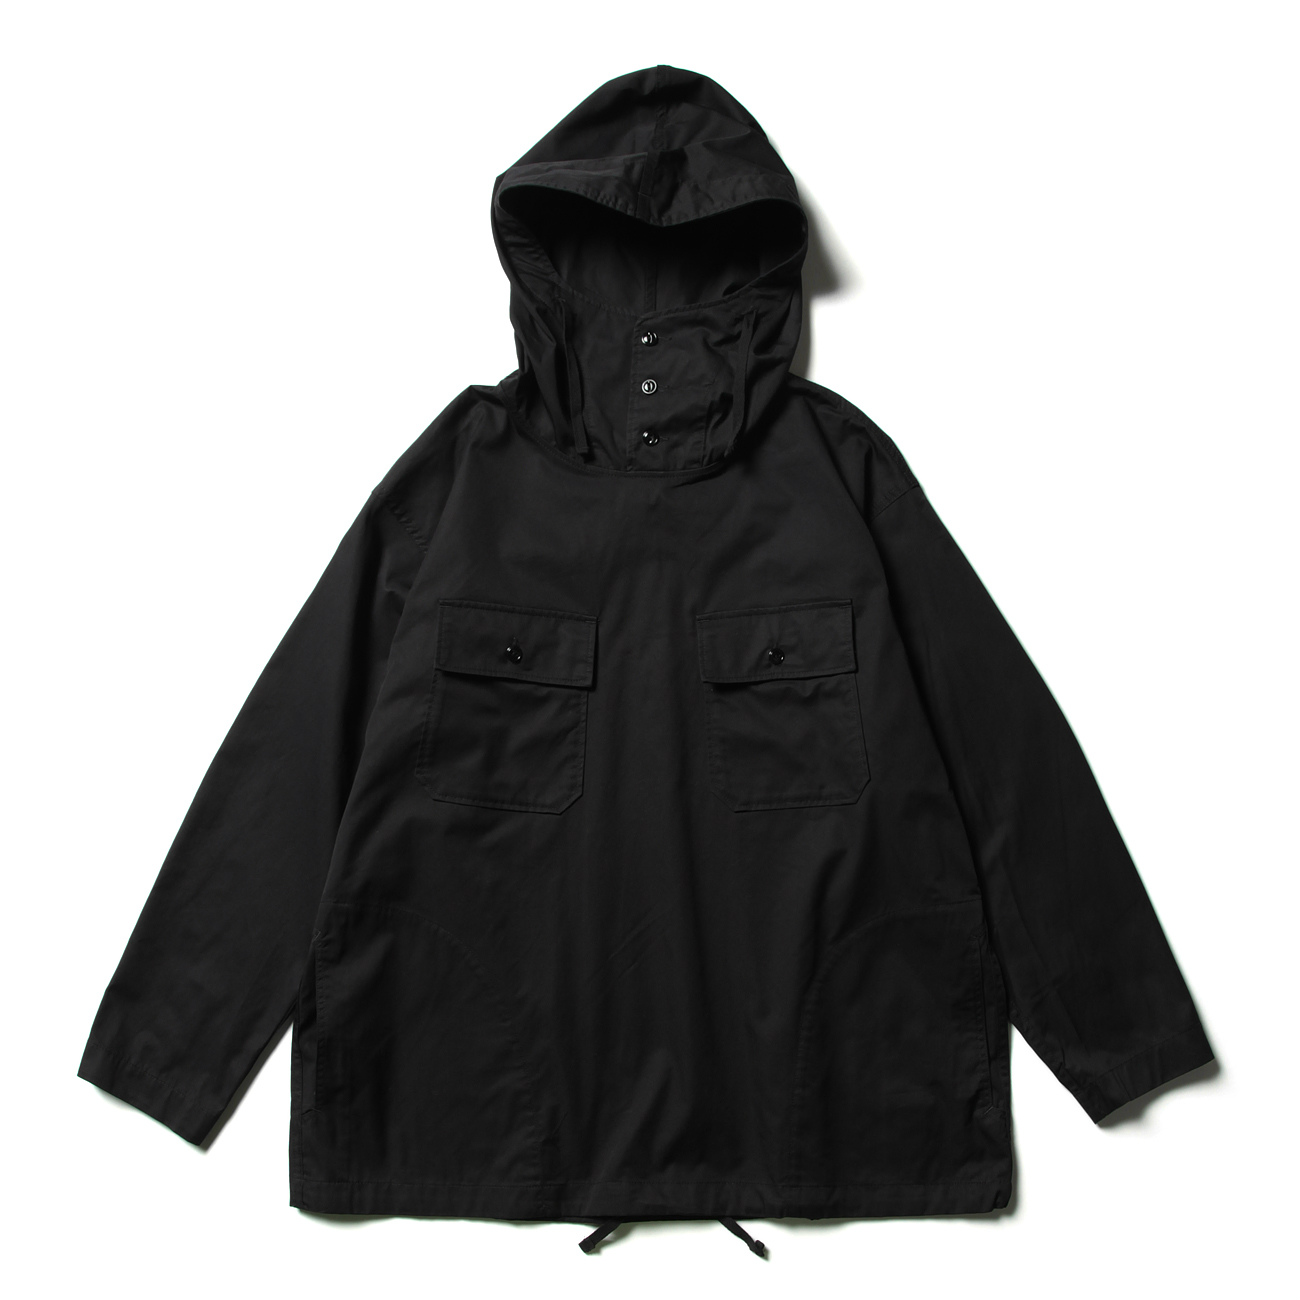 Cagoule Shirt - High Count Twill - Black